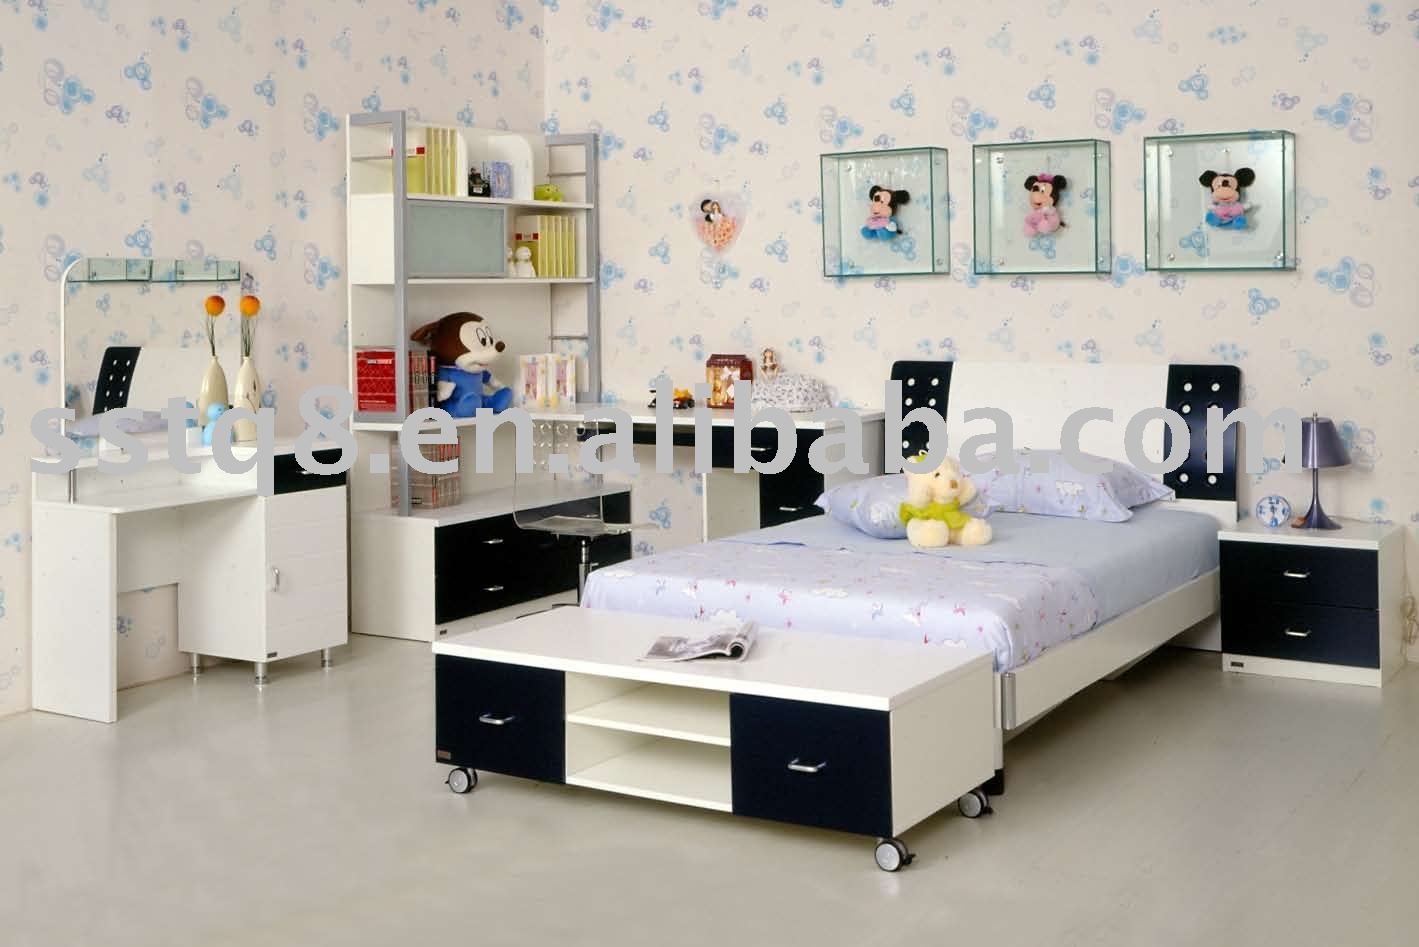 cheap childrens bedroom furniture sets on Smart Kids Bedroom Sets Products  Buy Smart Kids Bedroom Sets Products